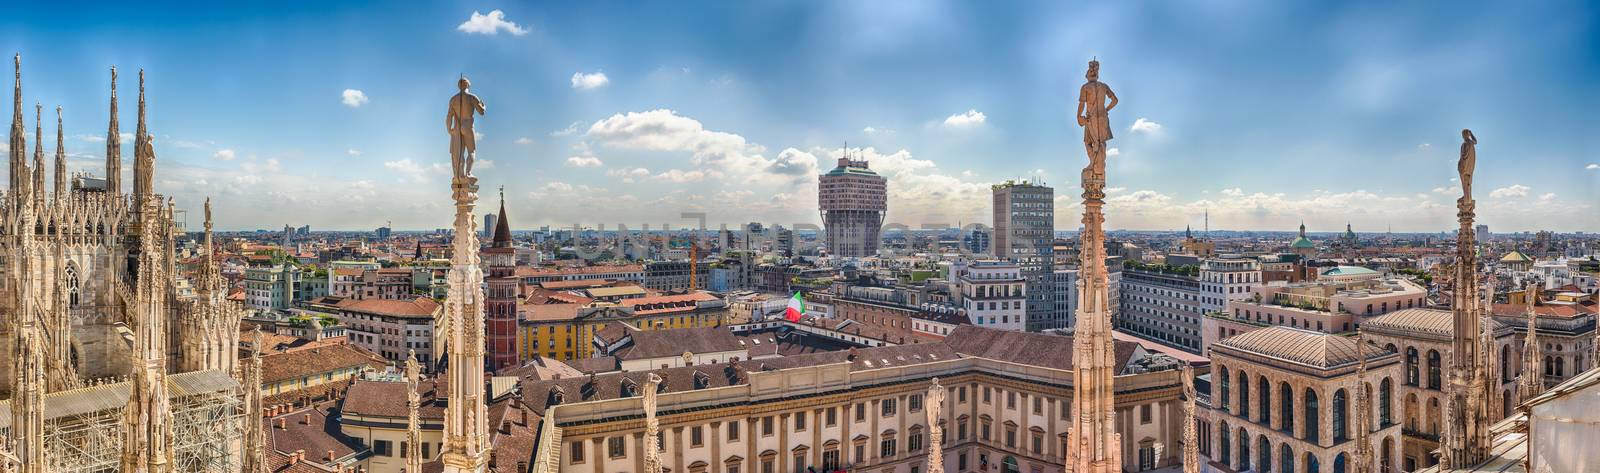 Aerial view from the roof of the Cathedral, Milan, Italy by marcorubino